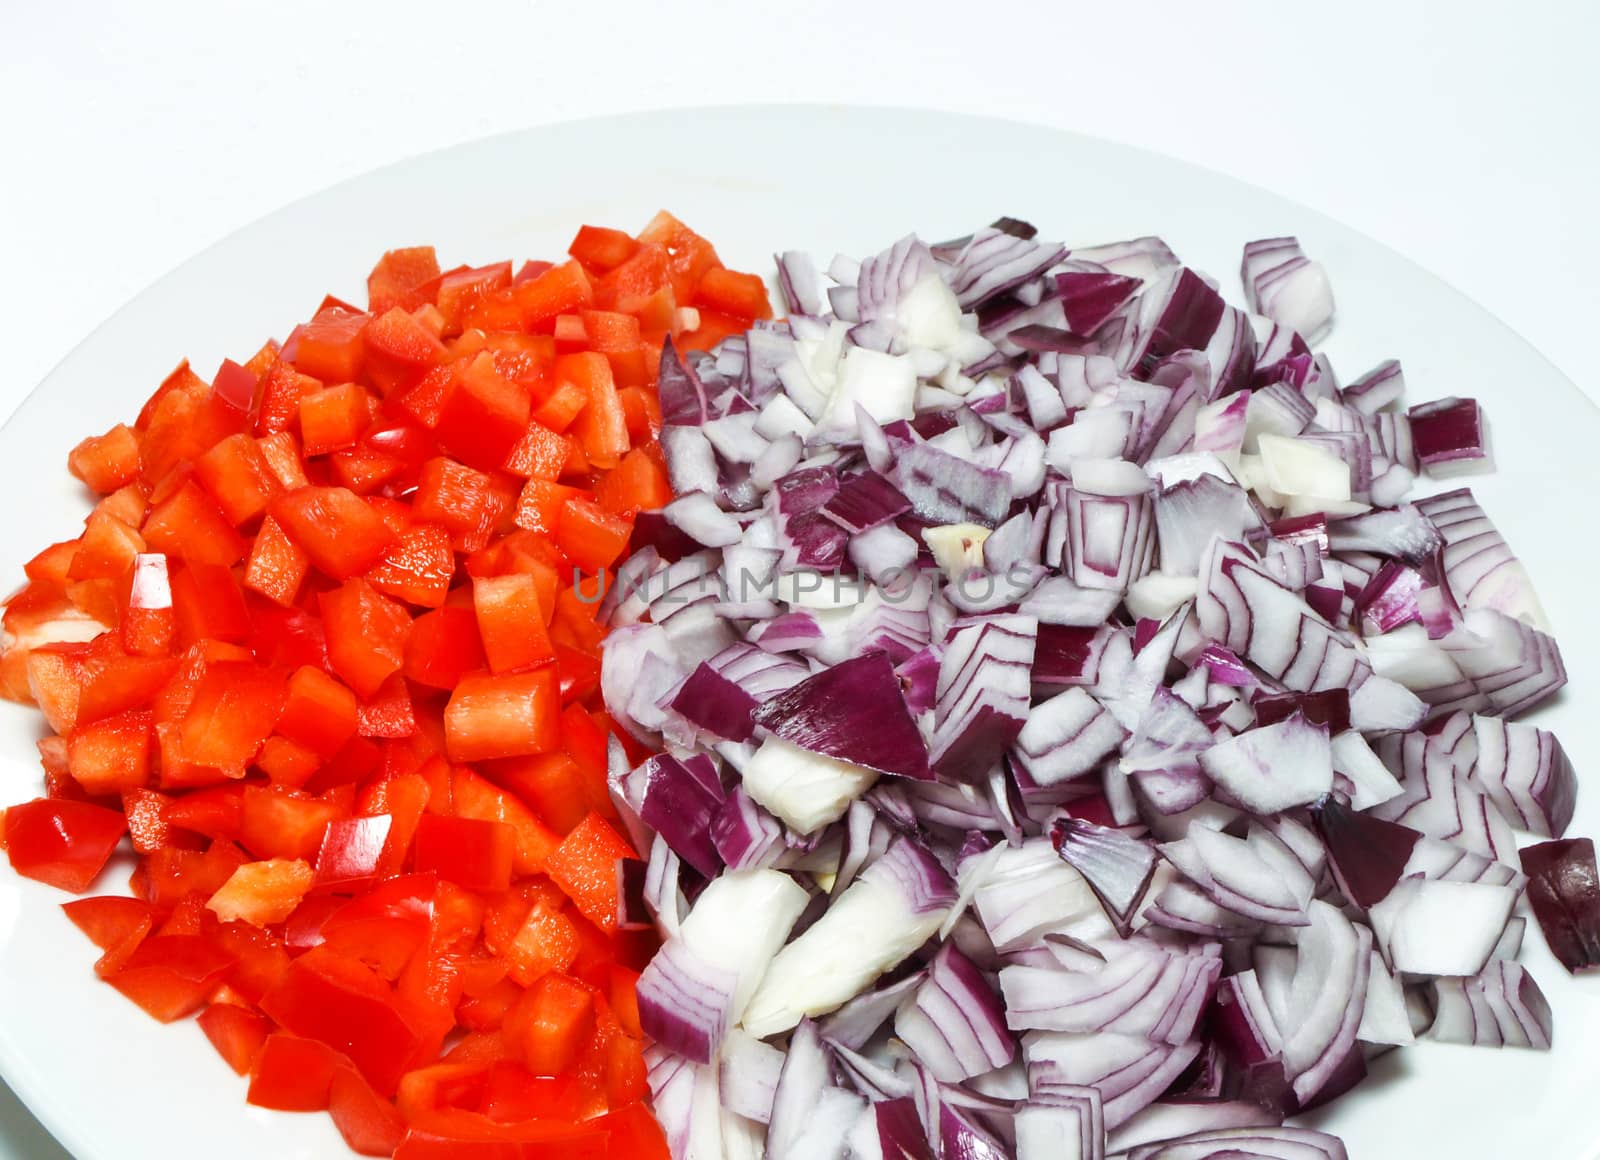 Chopped red onion and red pepper in a white ball, towards white background